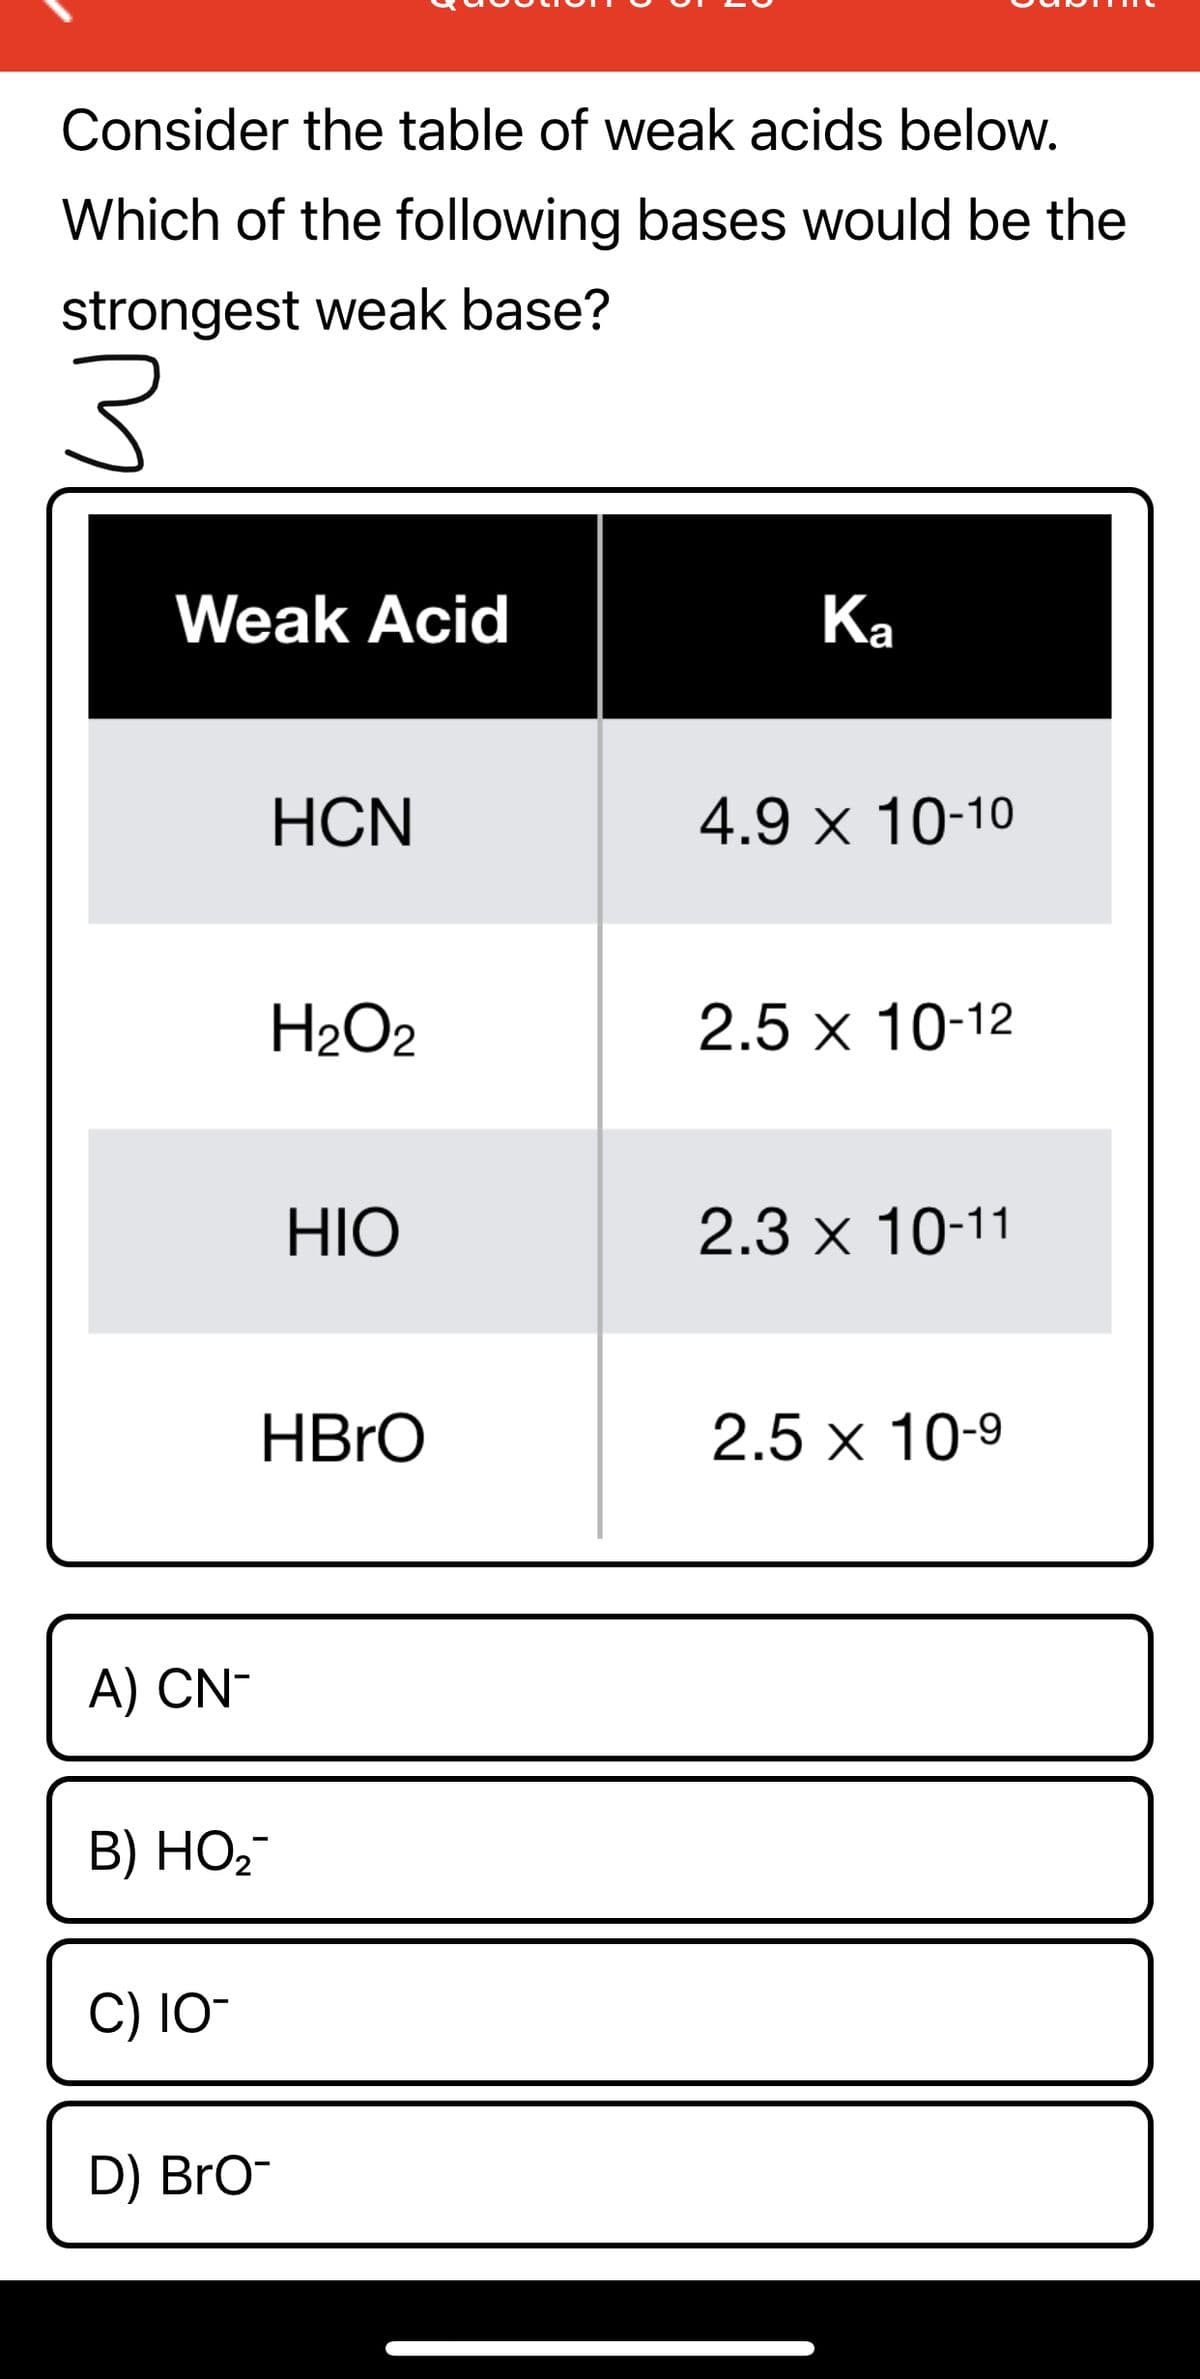 Consider the table of weak acids below.
Which of the following bases would be the
strongest weak base?
Weak Acid
Ка
HCN
4.9 x 10-10
H2O2
2.5 x 10-12
HIO
2.3 x 10-11
HBRO
2.5 x 10-9
A) CN-
В) НО-
C) 1O-
D) Bro-
